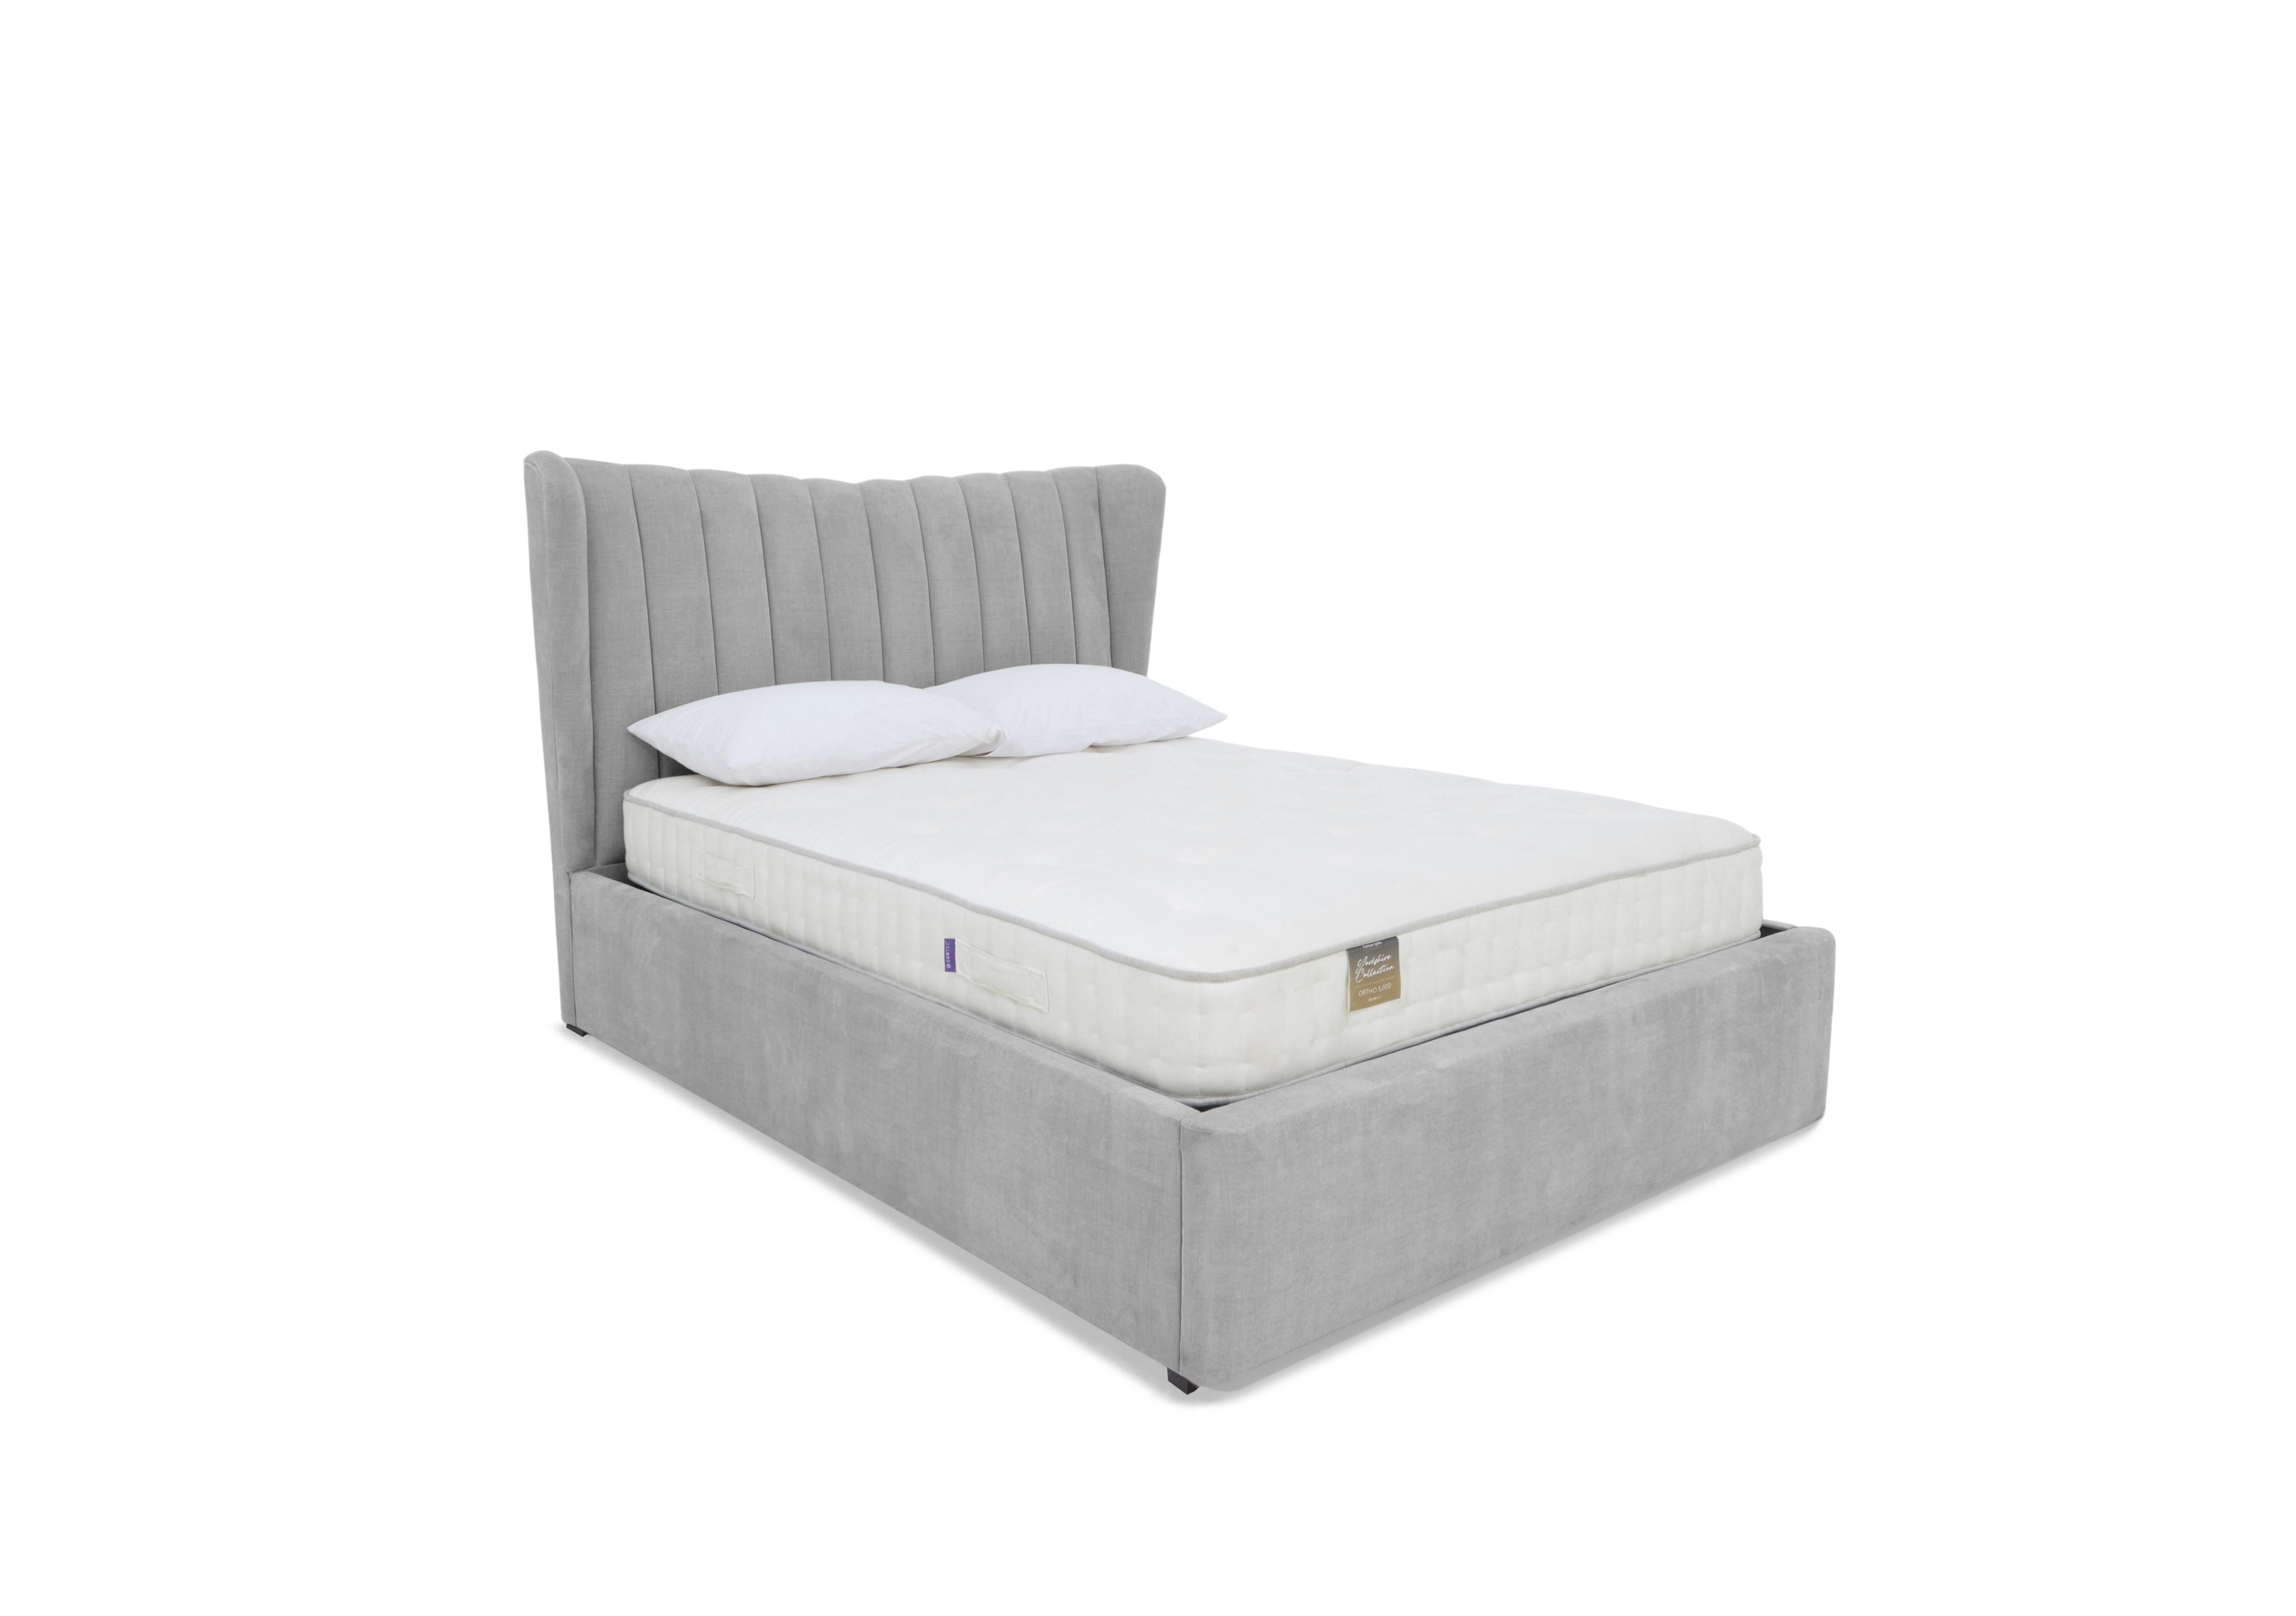 Bourne Electric Ottoman Bed Frame in Aston Silver on Furniture Village